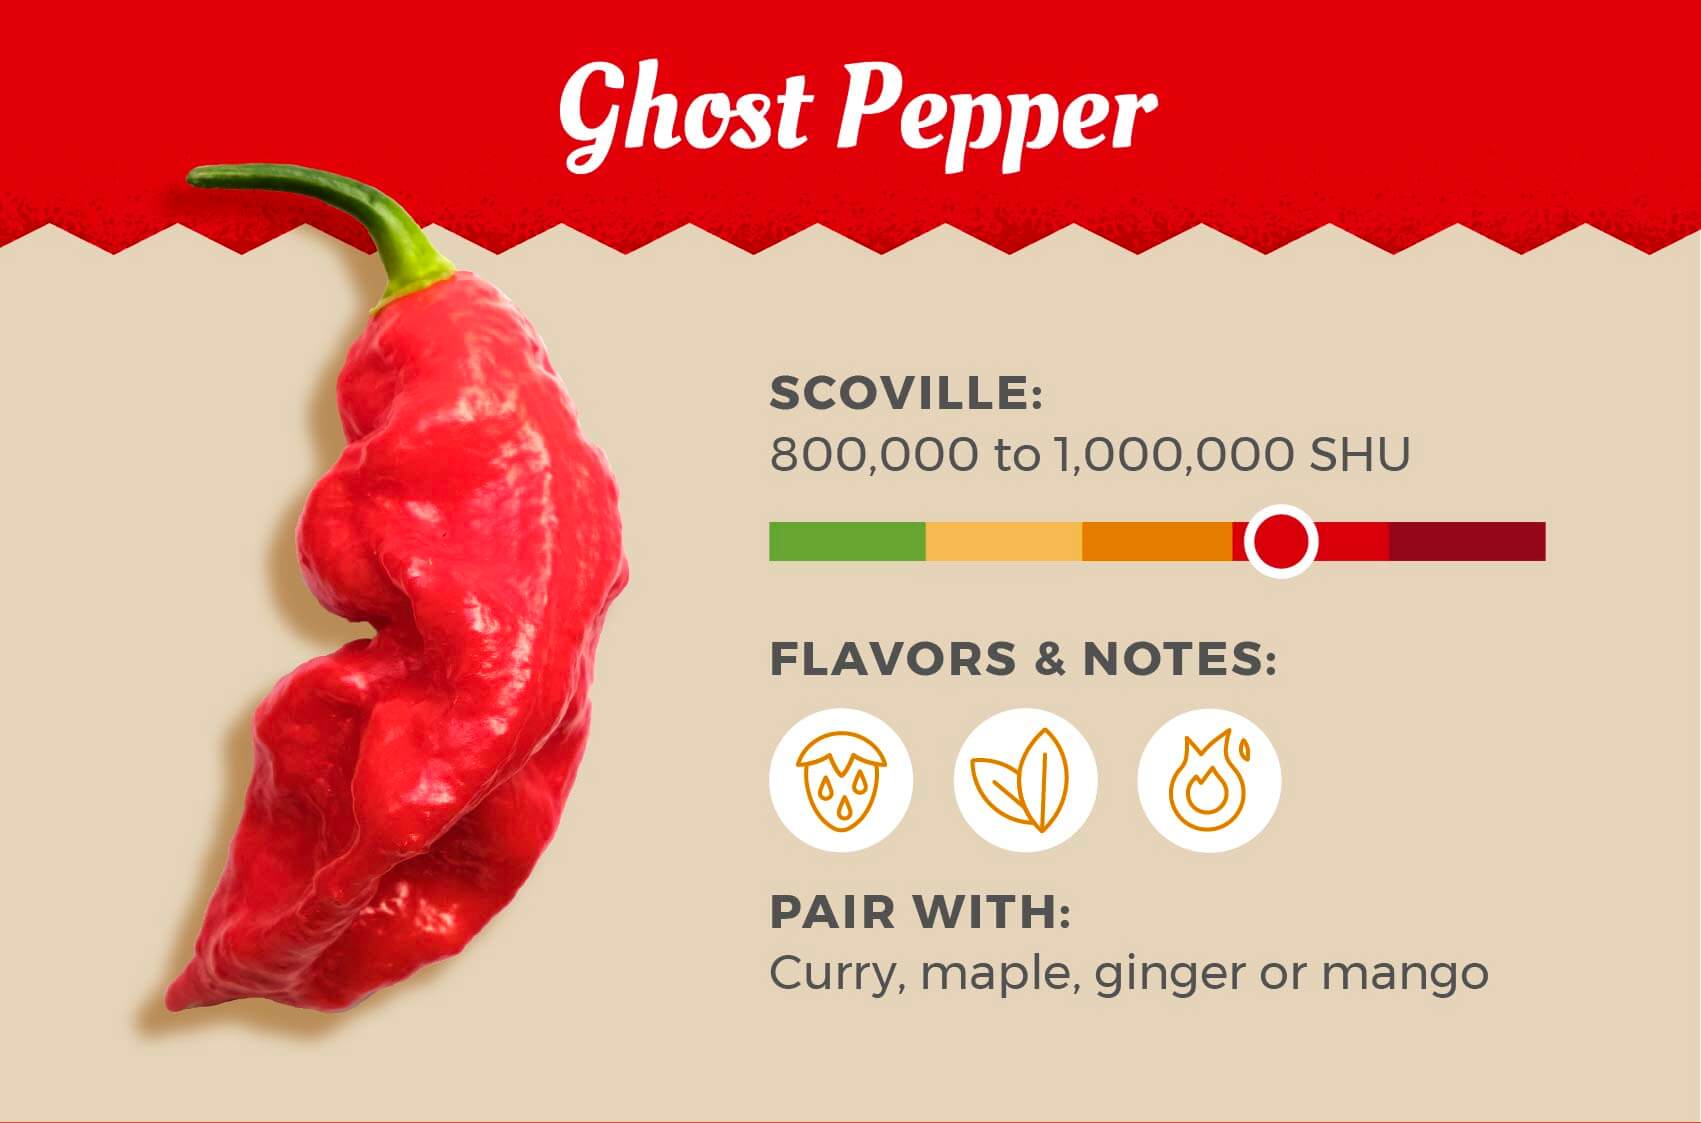 Ghost Pepper is the number 7 hottest pepper on this list with a high score of 1 million Scoville heat units, pair it with curry, maple ginger or mango.